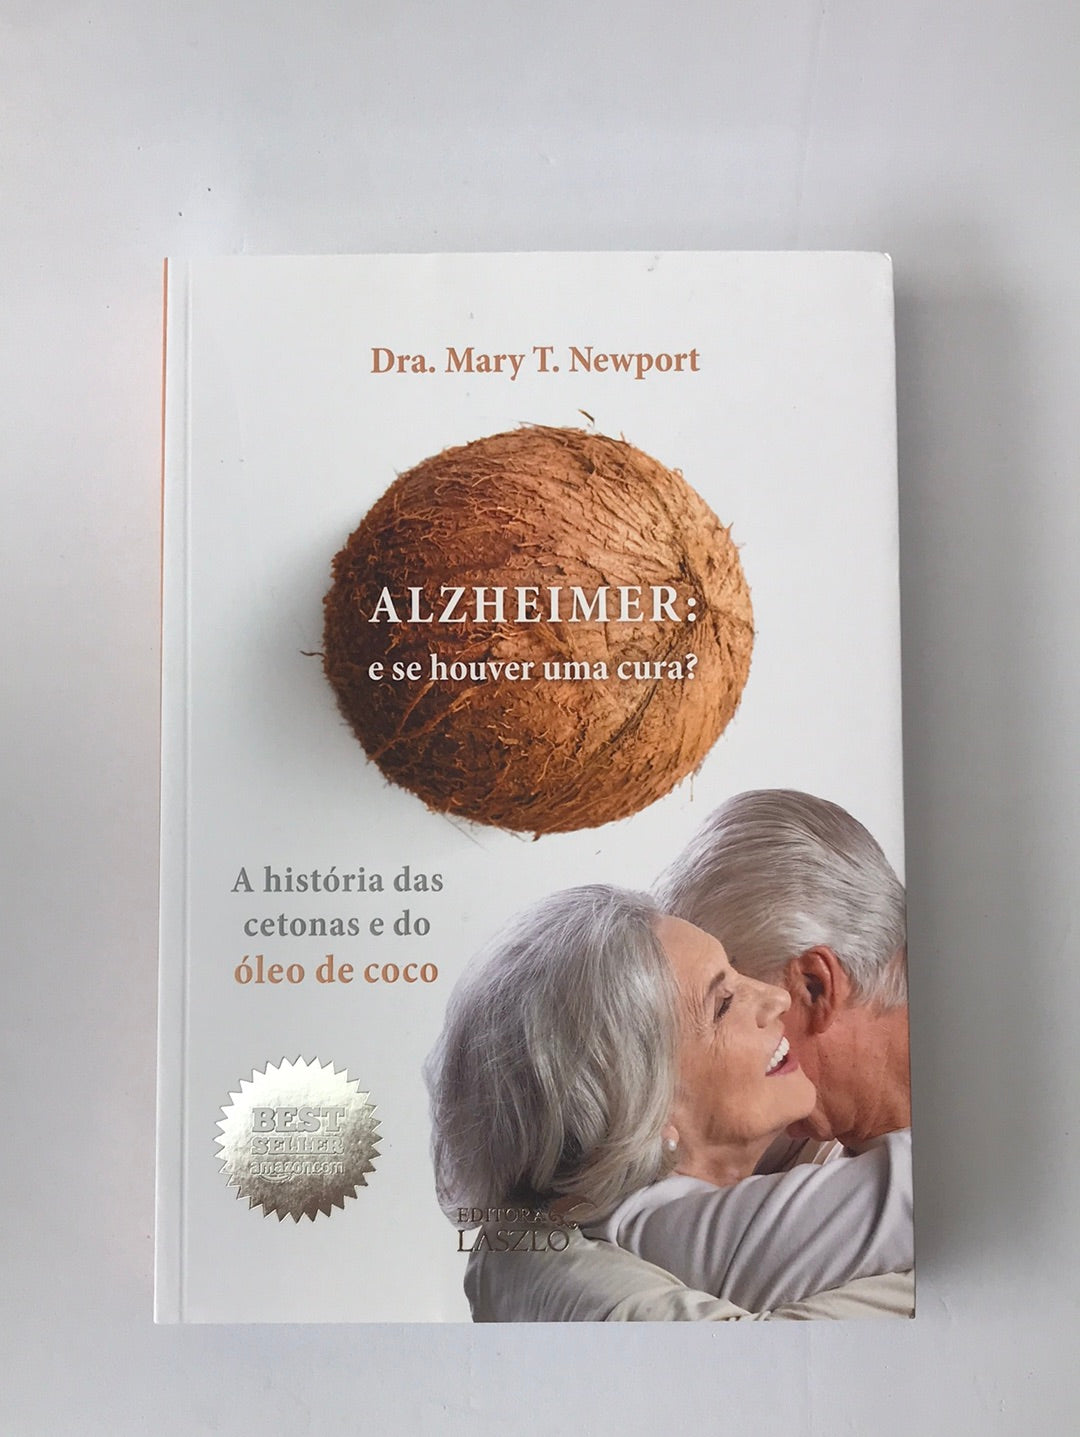 Alzheimer's book, what if there is a cure?